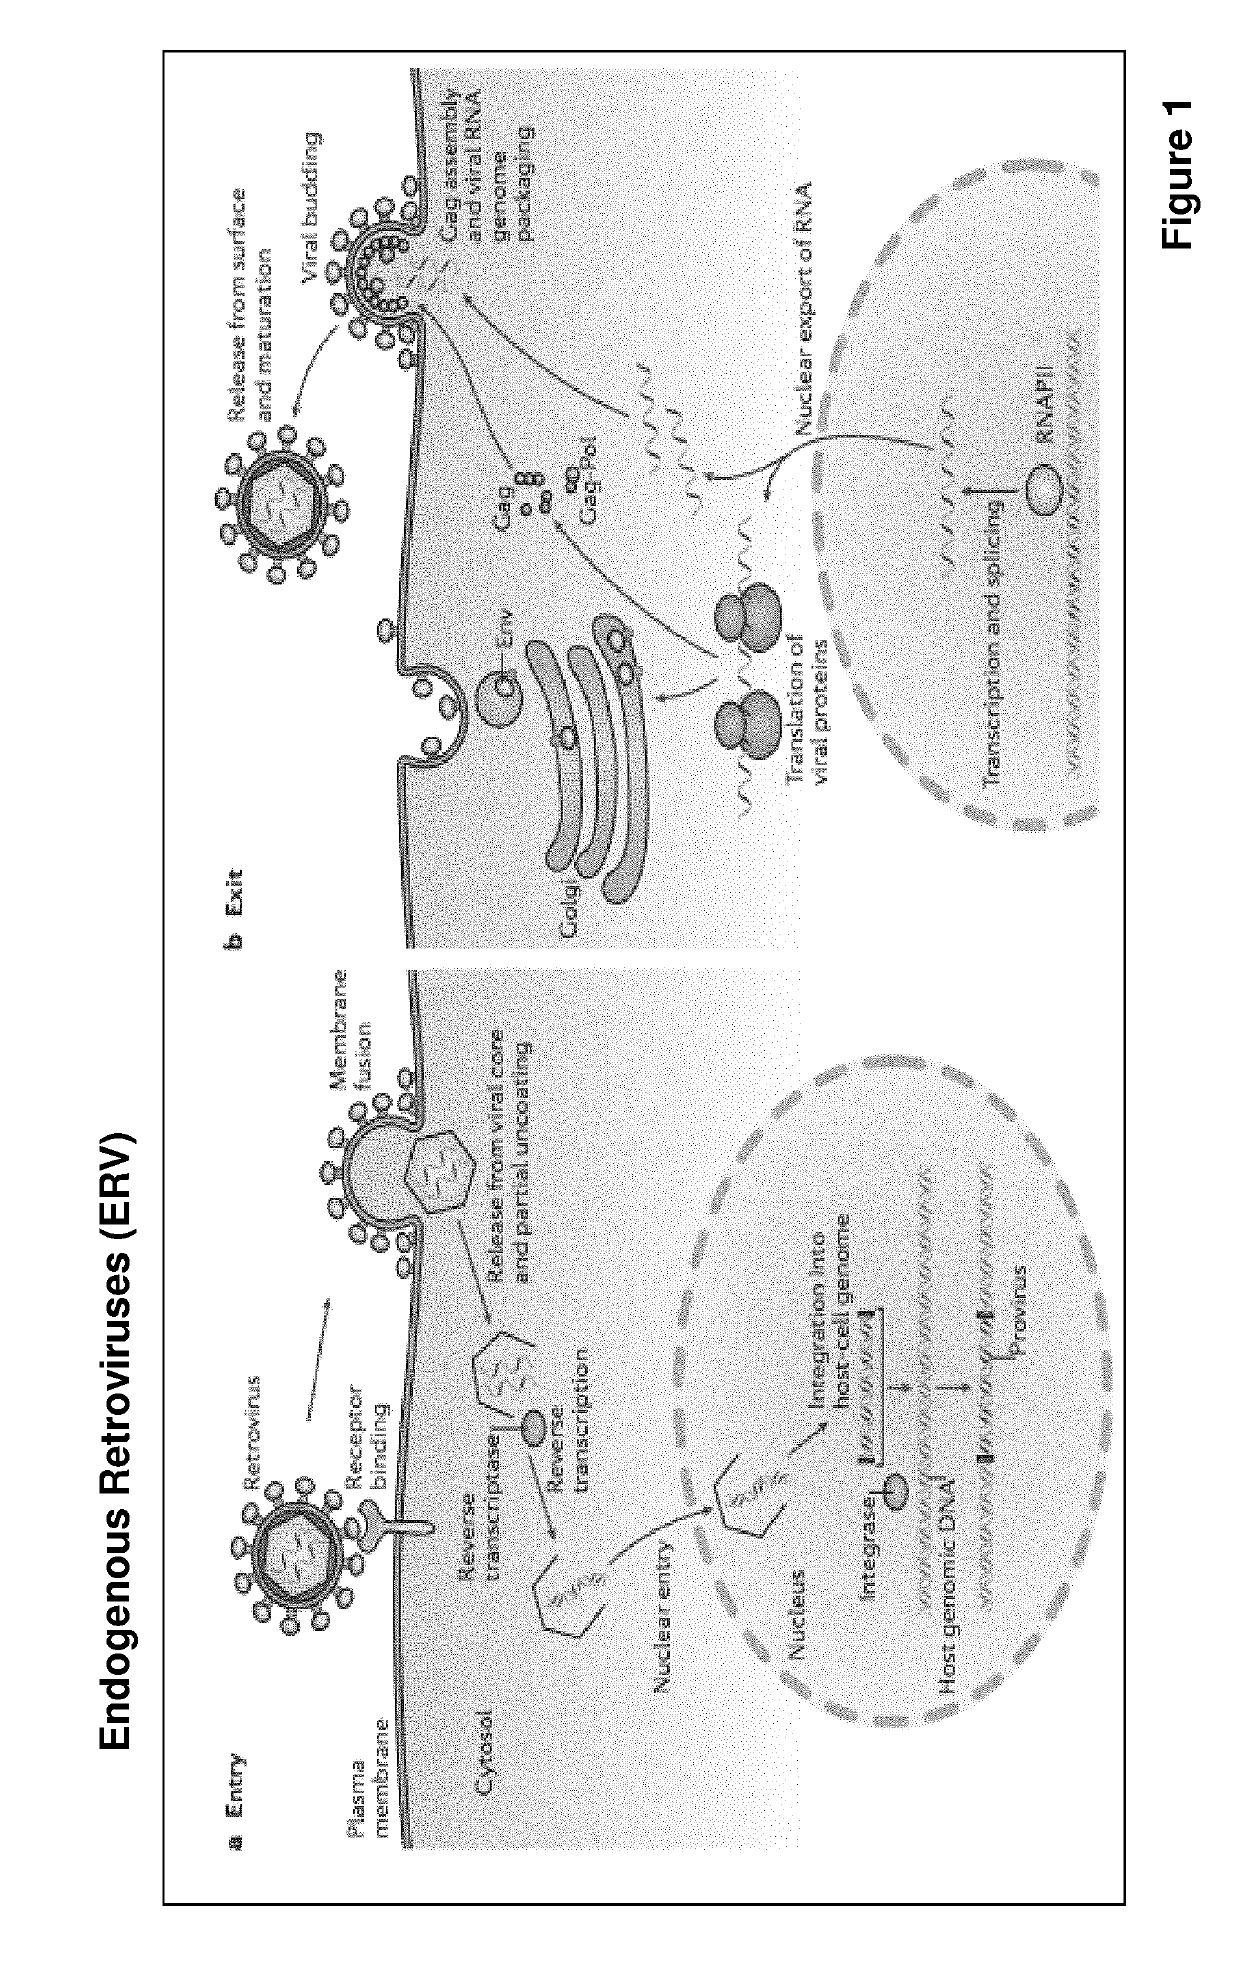 Improved eukaryotic cells for protein manufacturing and methods of making them